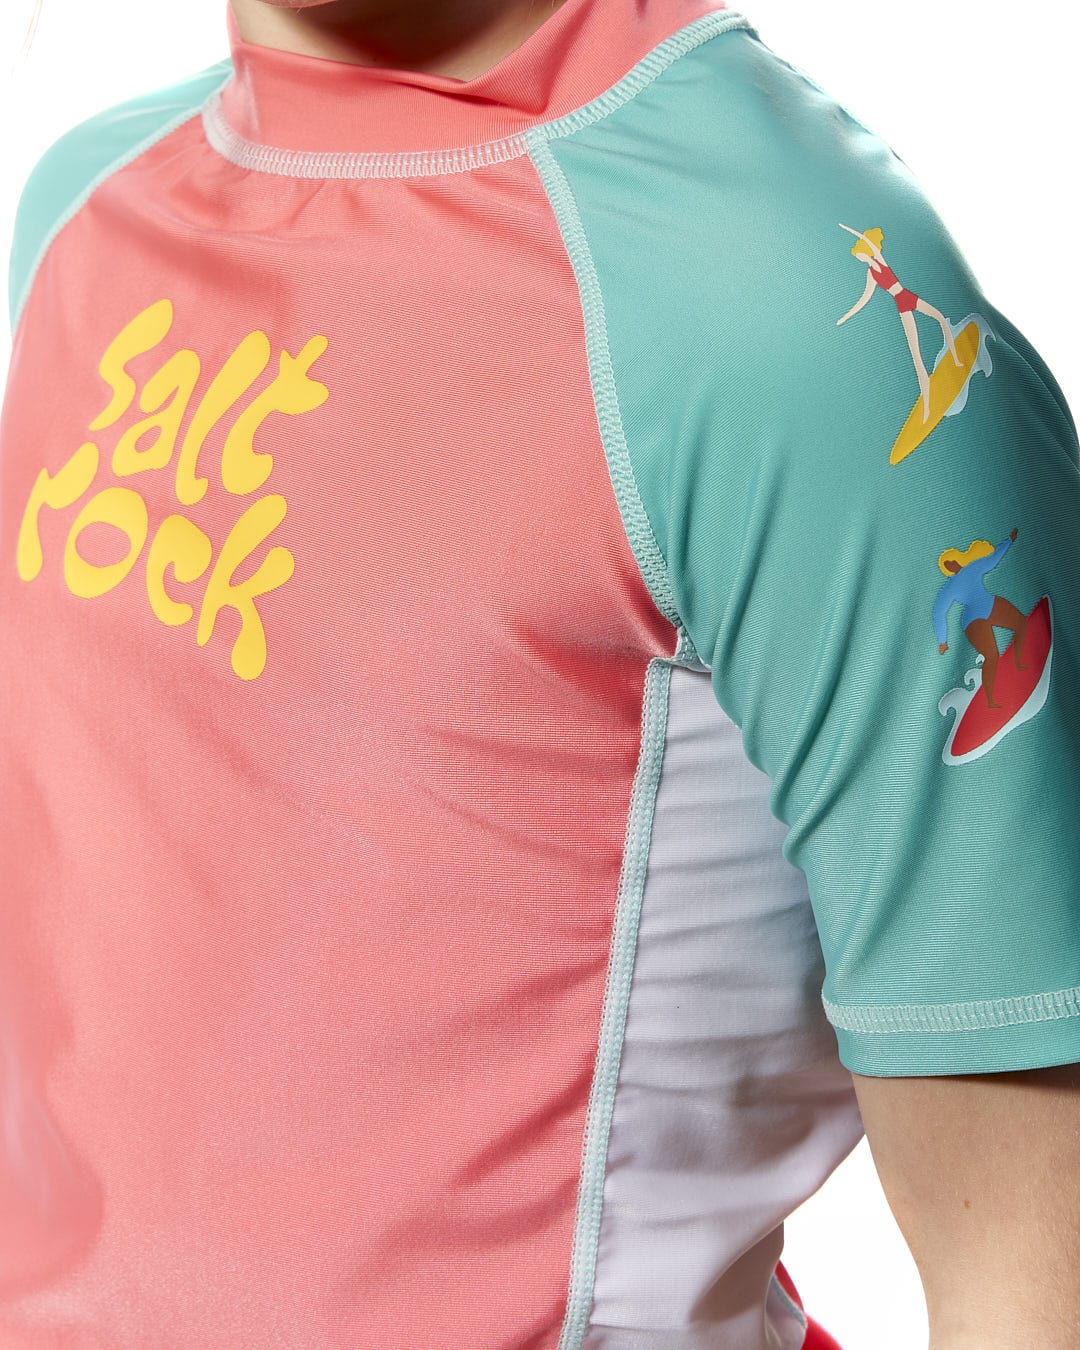 A young girl wearing a Saltrock Surf Sister - Kids Short Sleeve Rashvest in Coral/Turquoise.